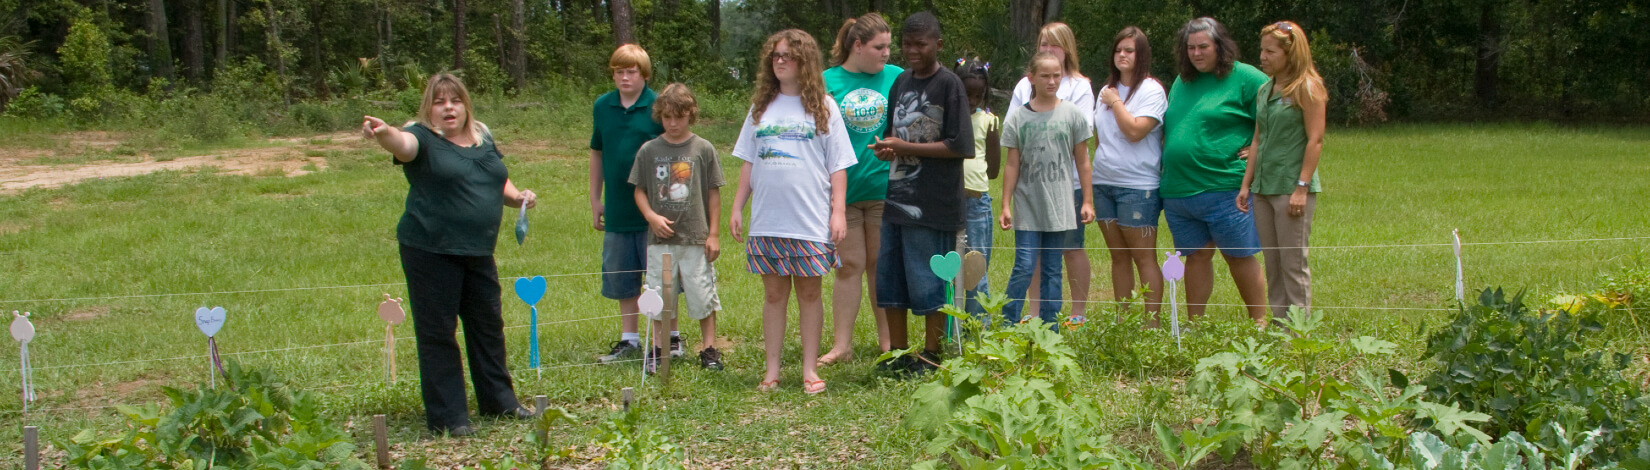 Youth planting